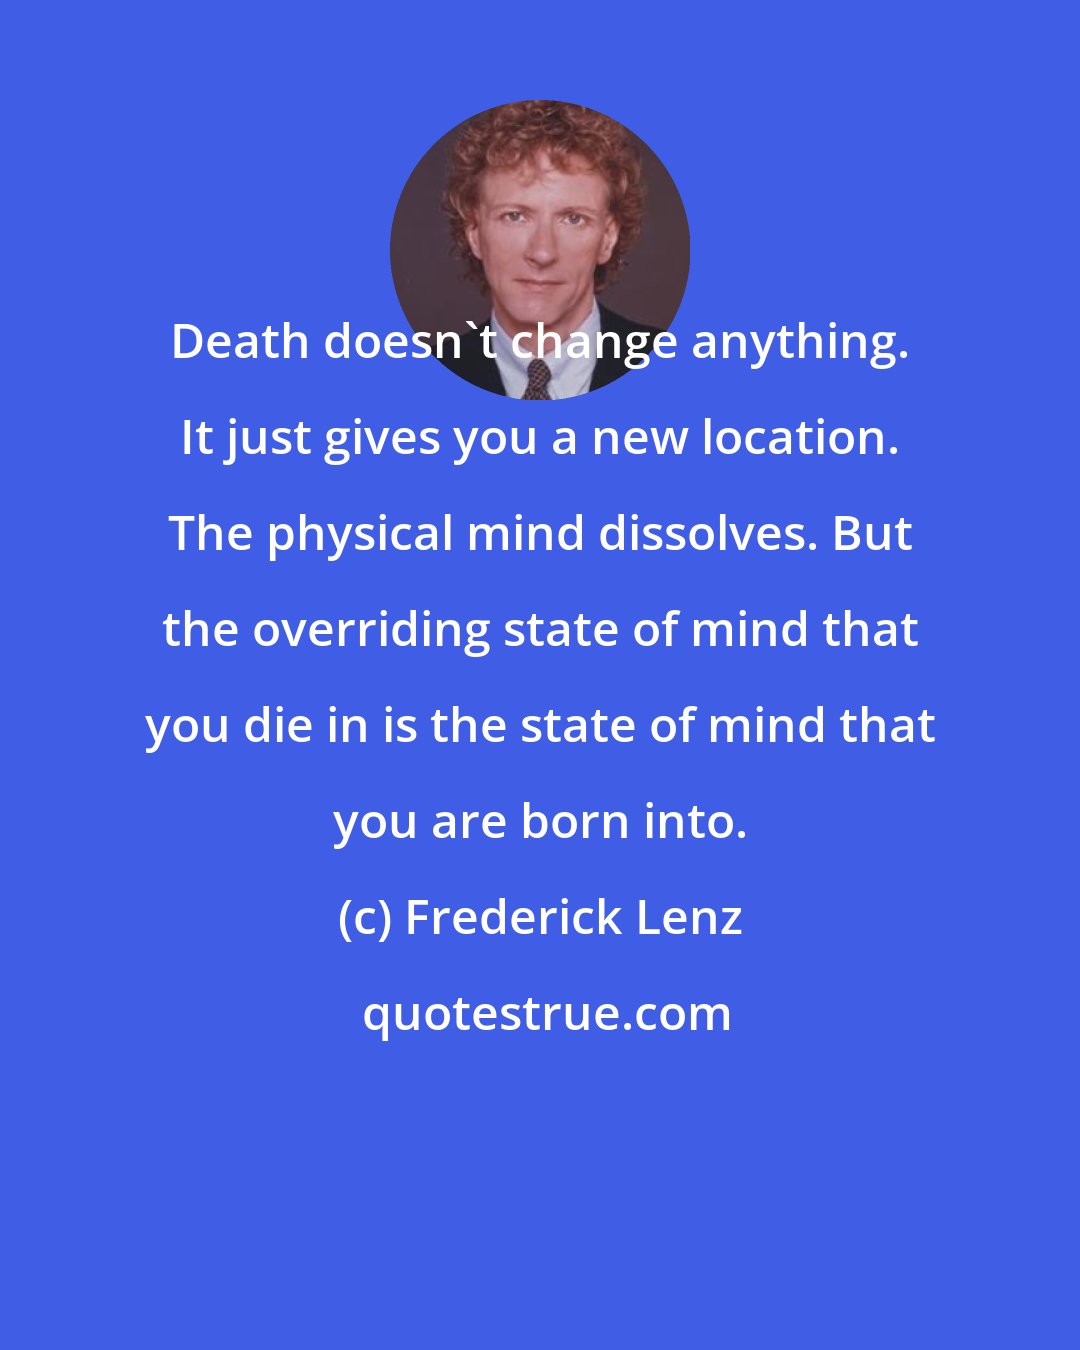 Frederick Lenz: Death doesn't change anything. It just gives you a new location. The physical mind dissolves. But the overriding state of mind that you die in is the state of mind that you are born into.